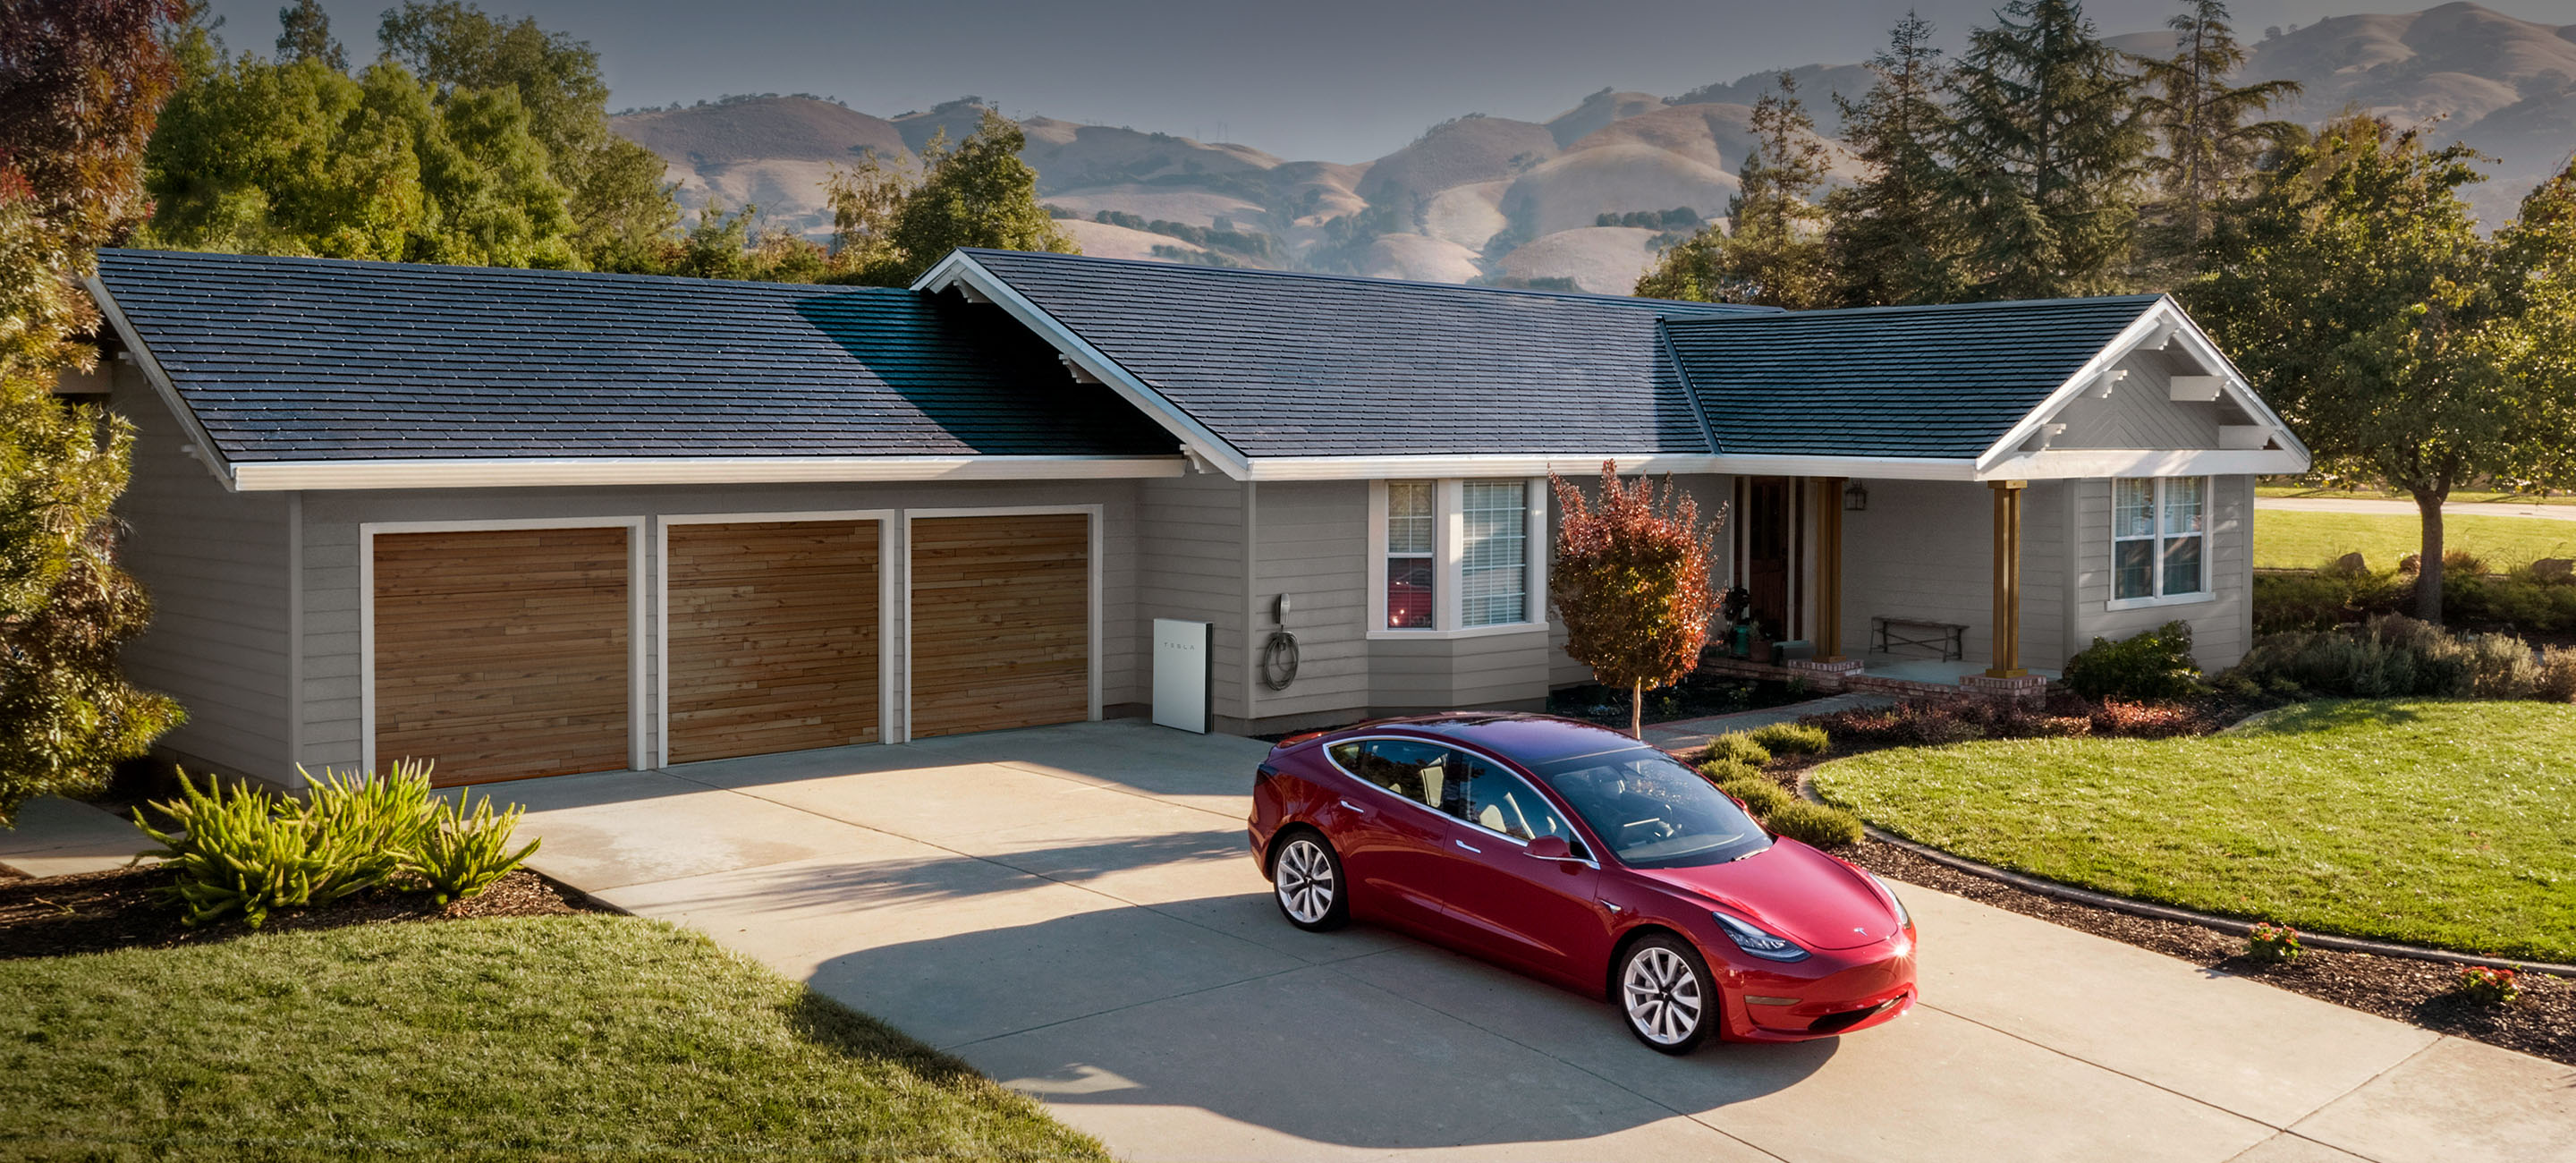 Tesla Redoubles Efforts To Expand Its Energy Business In 2019